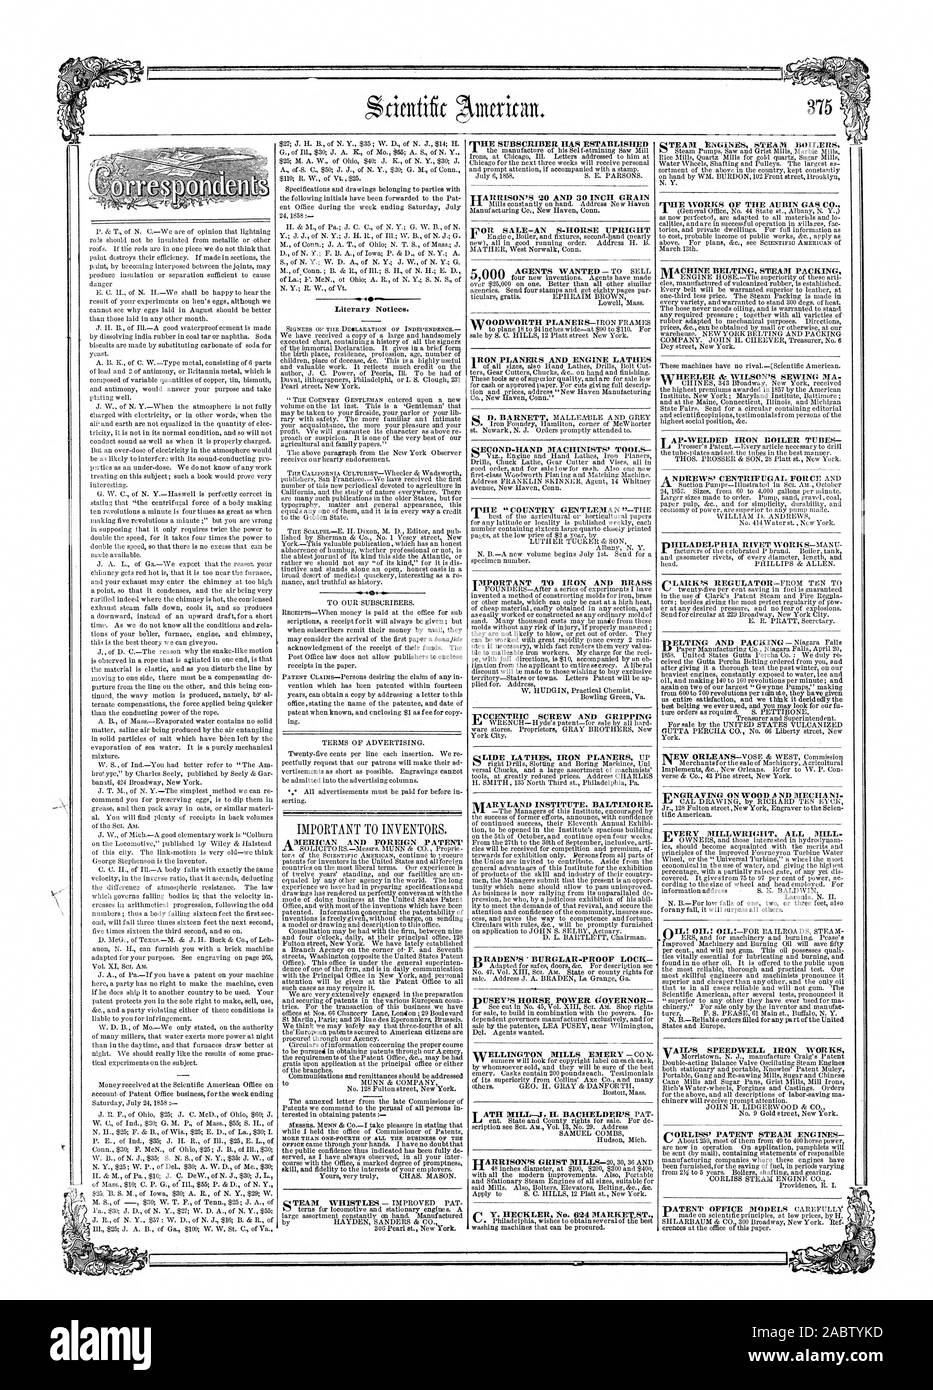 We are of opinion that lightning rTIHE SUBSCRIBER HAS ESTABLISHED VOII SALE—AN 8-HORSE UPRIGHT SECOND-HAND MACHINISTS' TOOLS TMPORTANT TO IRON AND BRASS MITE WORKS OF THE AUBIN GAS CO. TINGRAVING ON WOOD ND MEC HA NI ▪ TAIL'S SPEEDWELL IRON WORKS, scientific american, 1858-07-31 Stock Photo